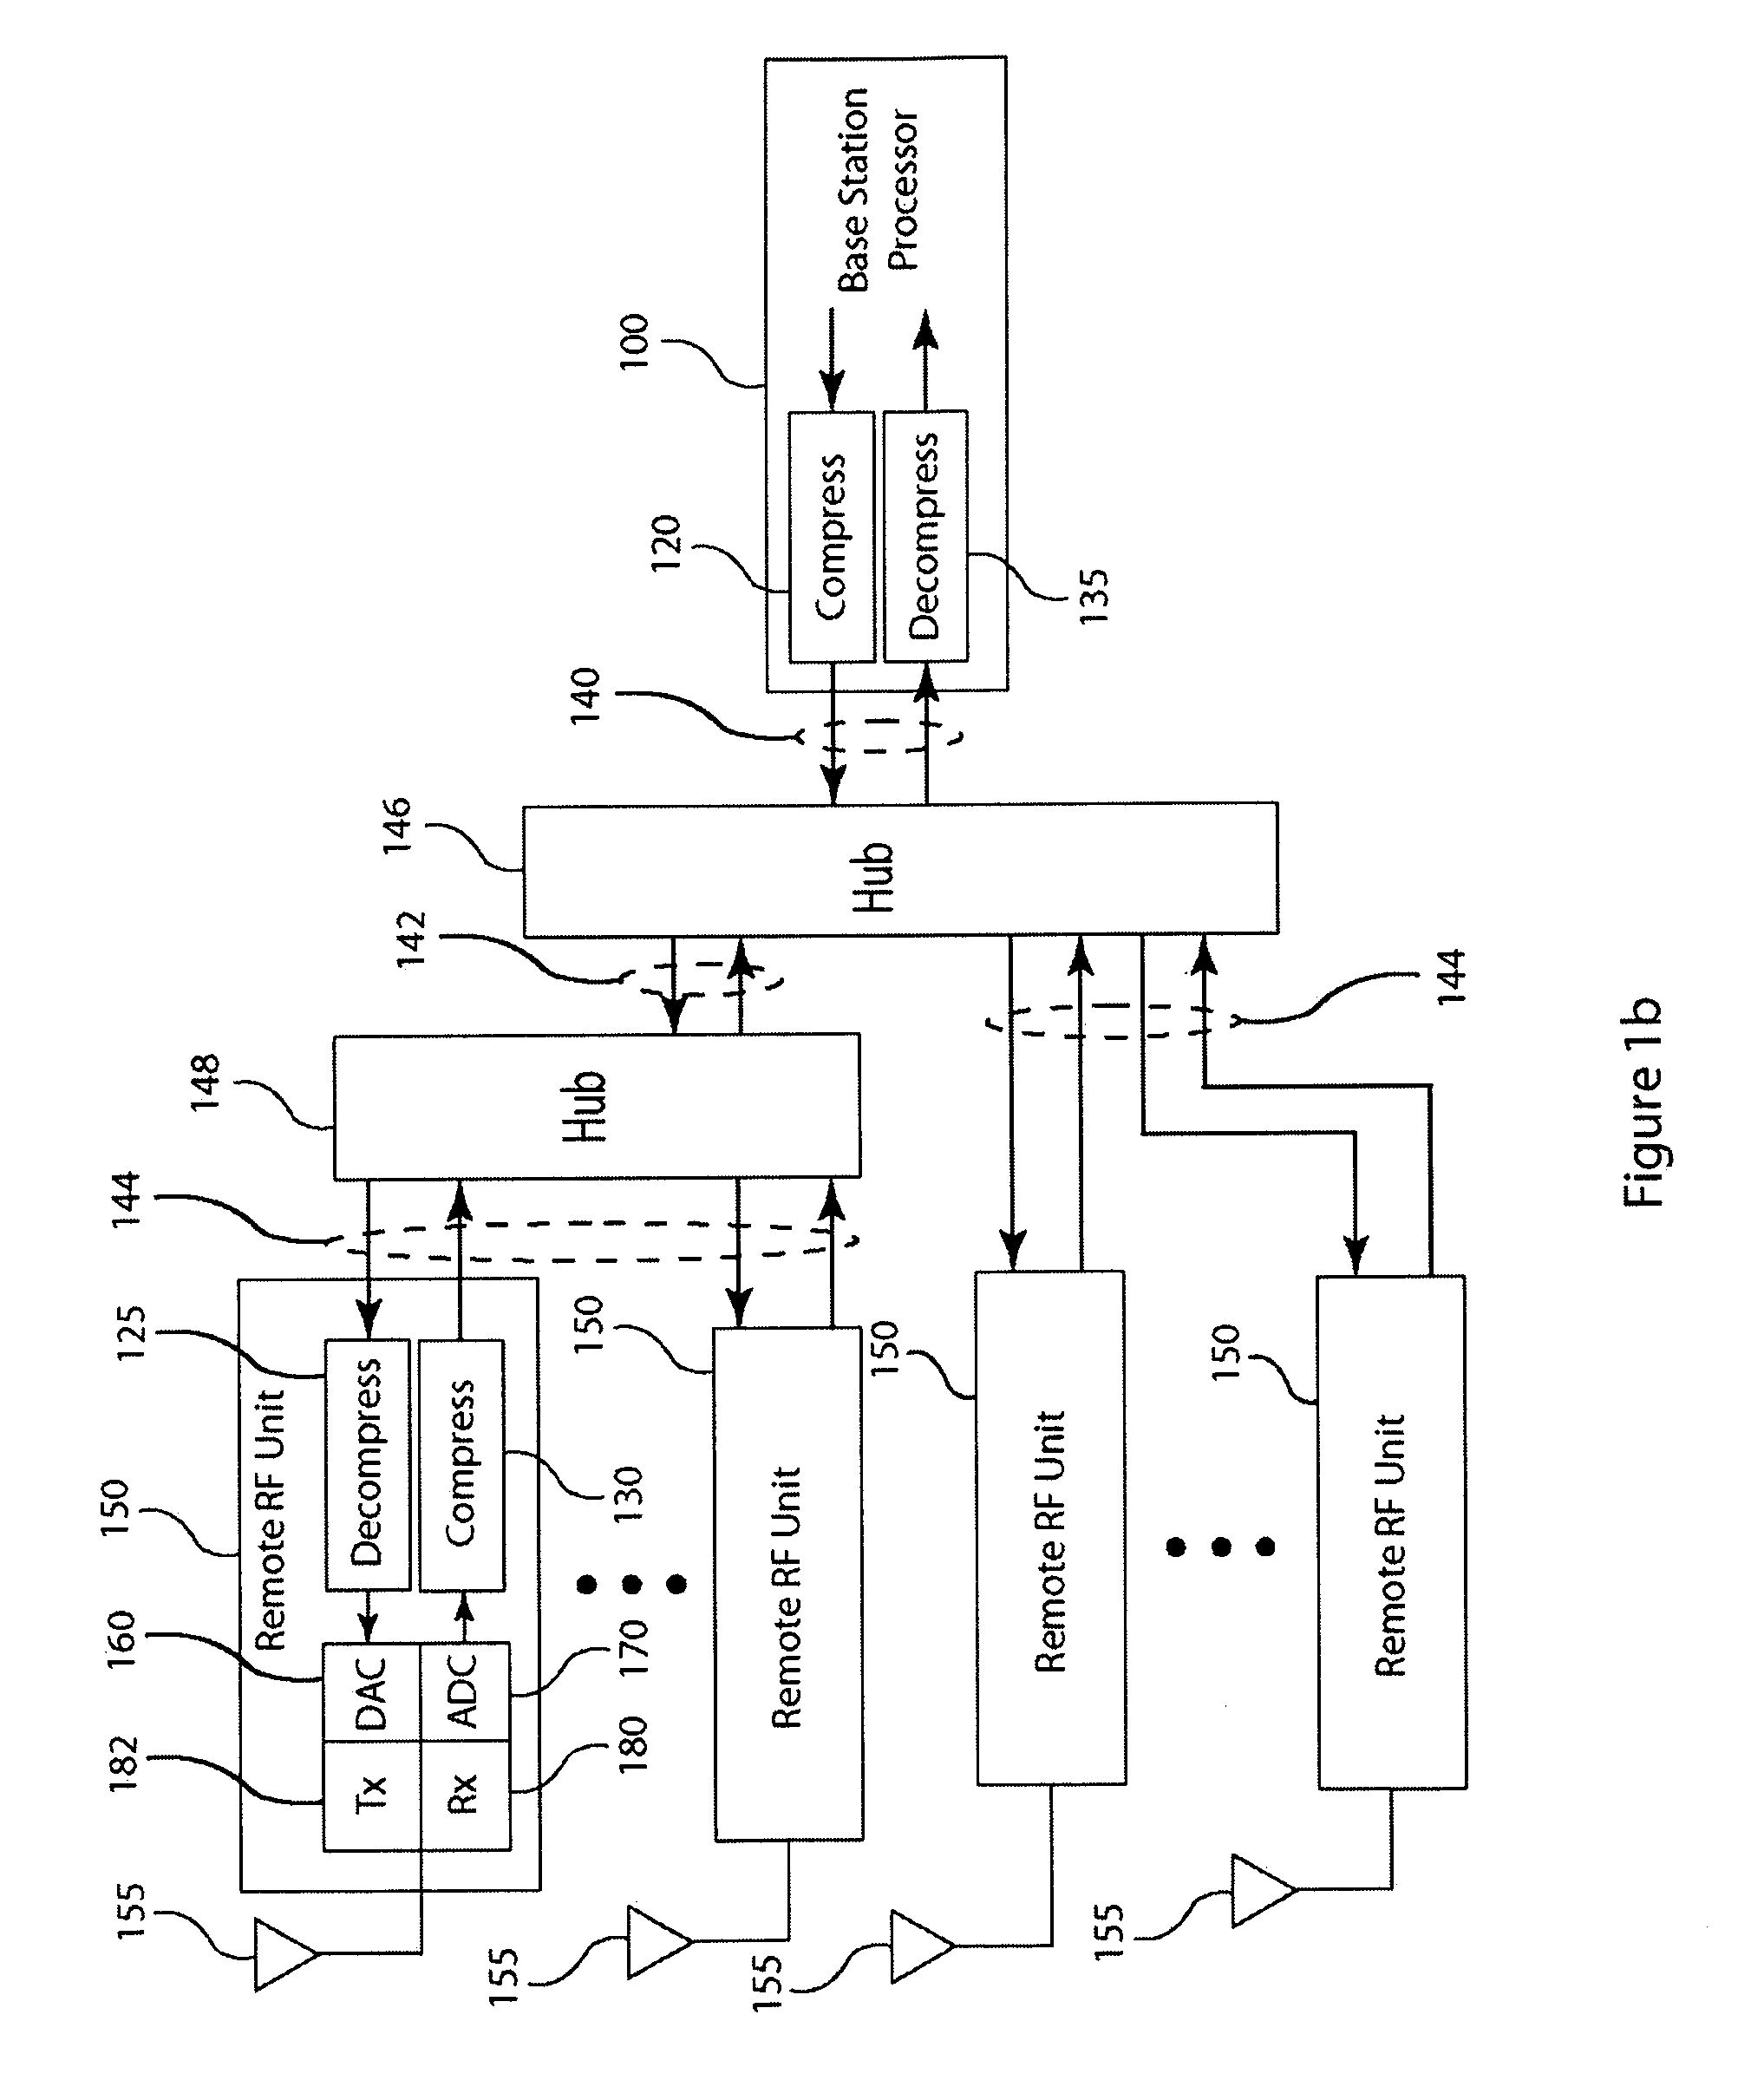 Compression of baseband signals in base transceiver systems